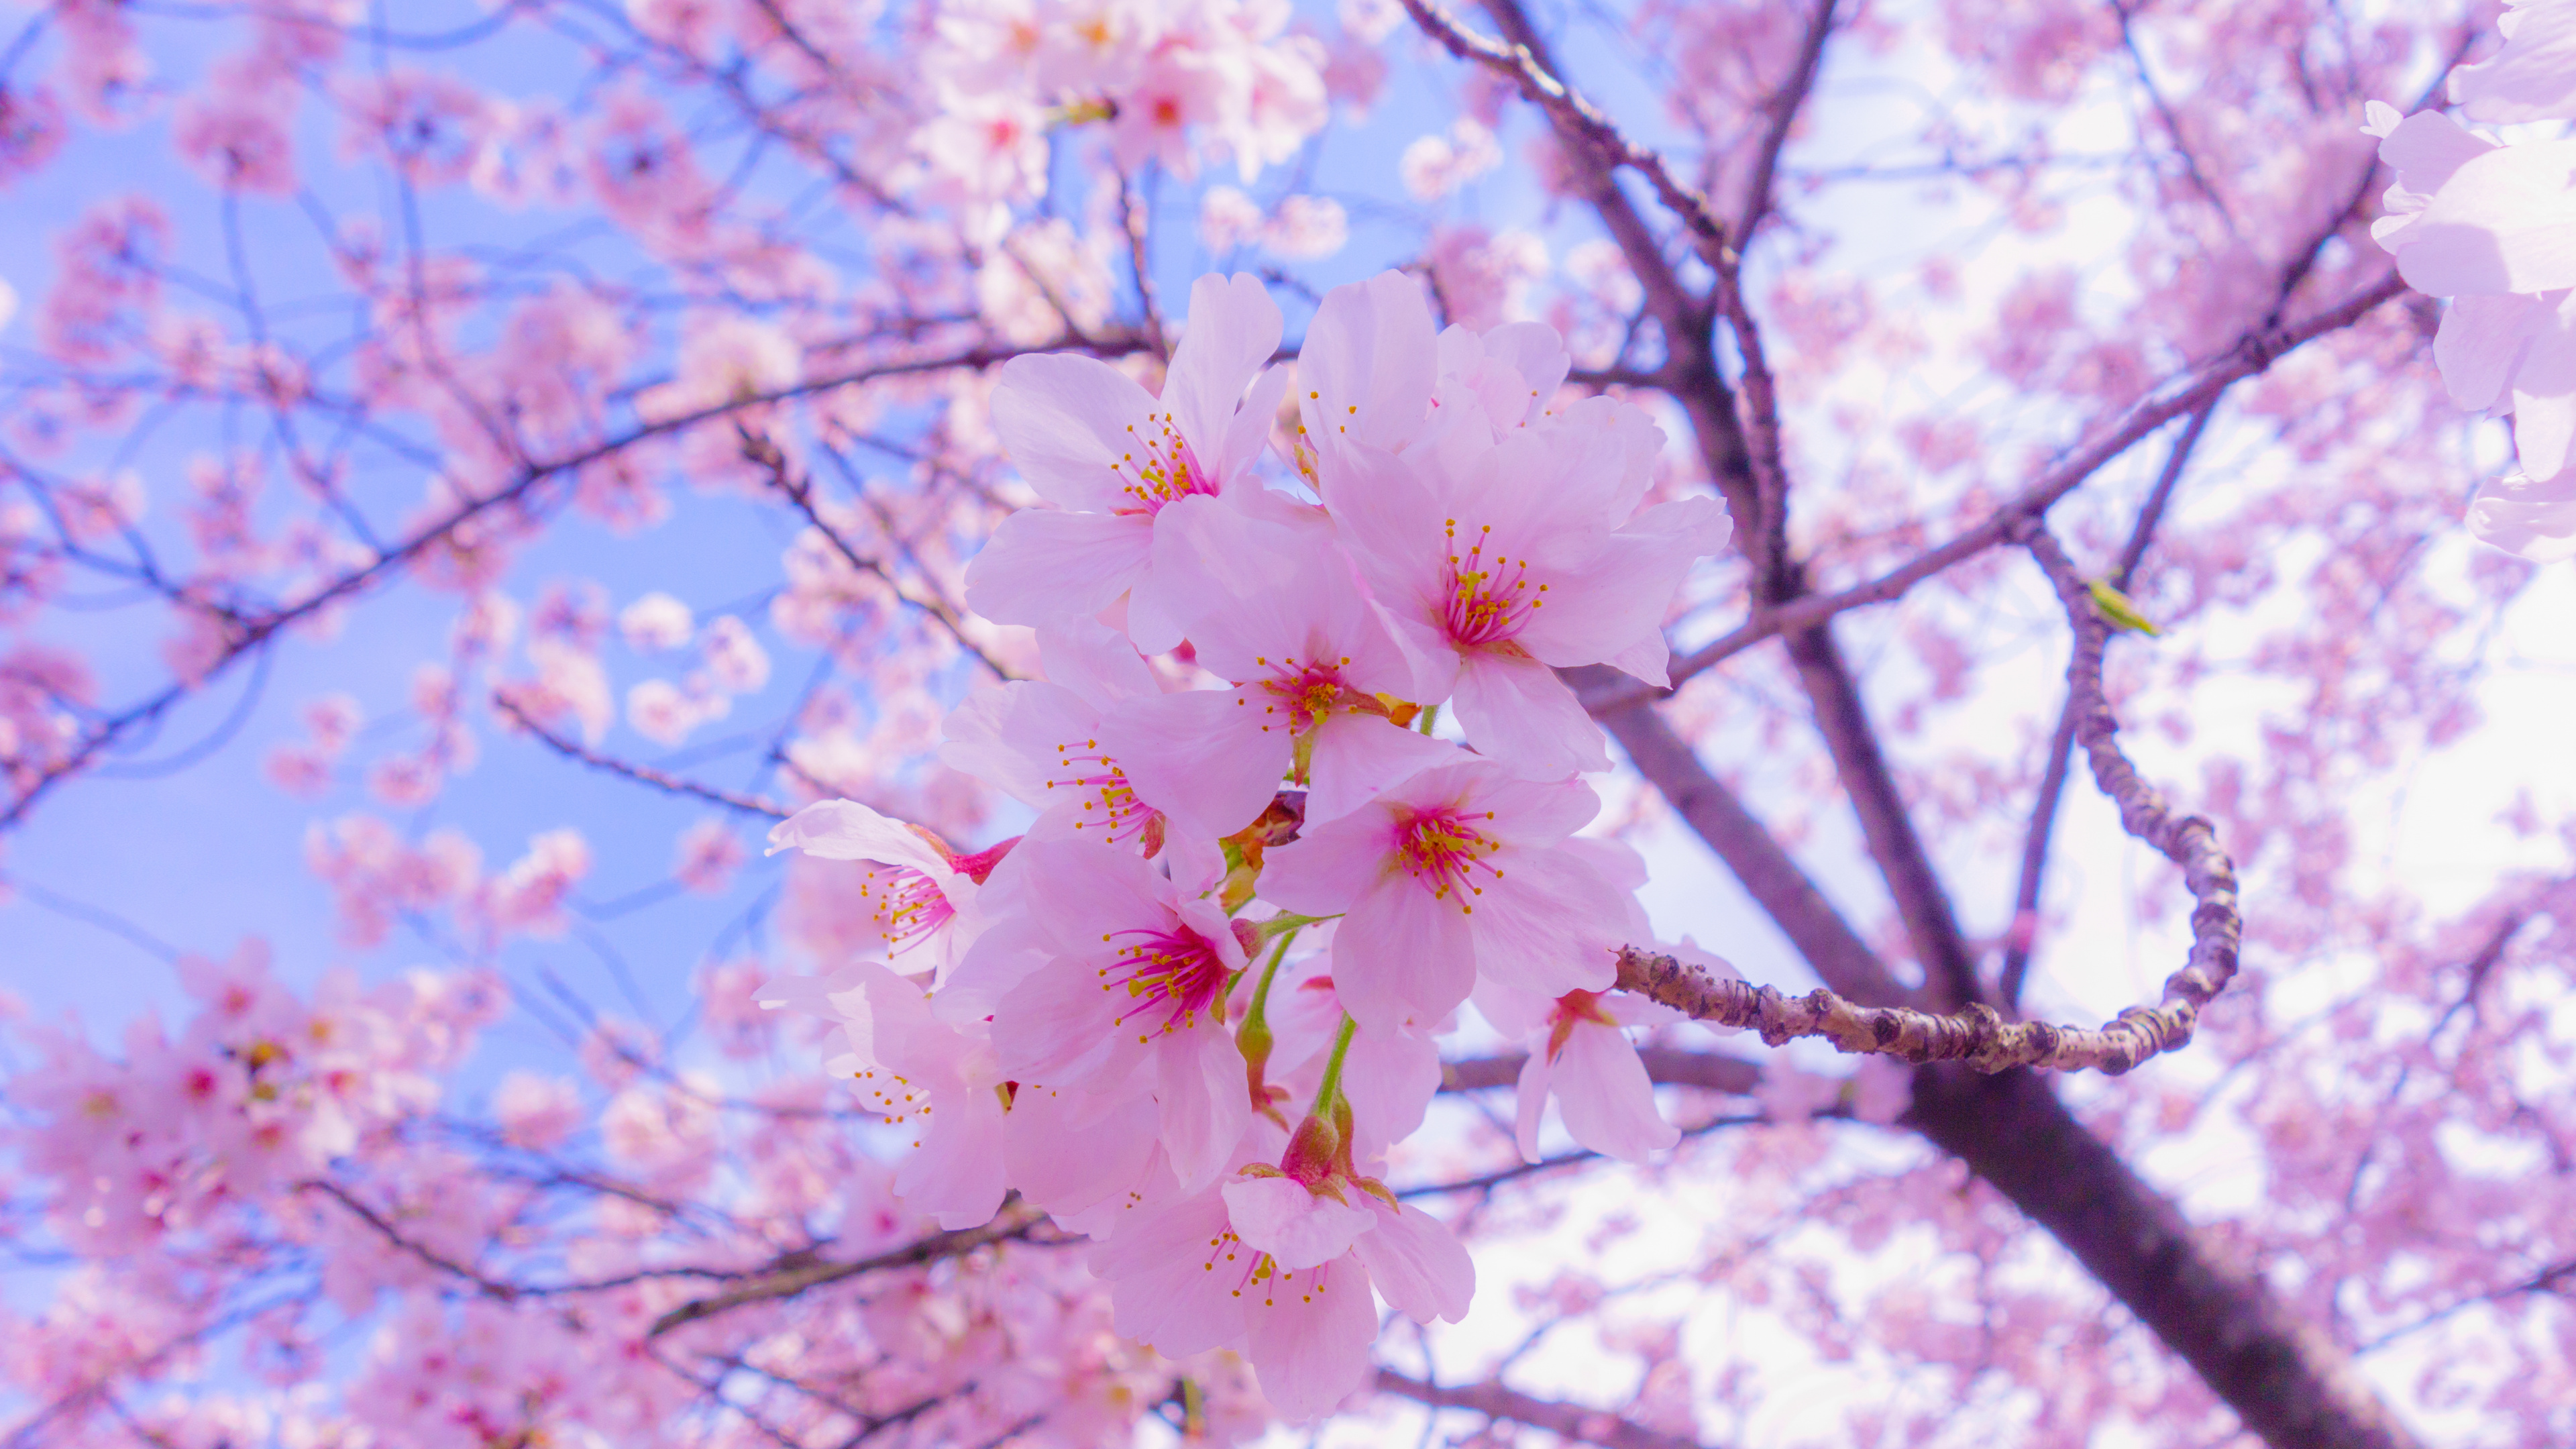 Pink Cherry Blossom Tree During Daytime. Wallpaper in 3840x2160 Resolution